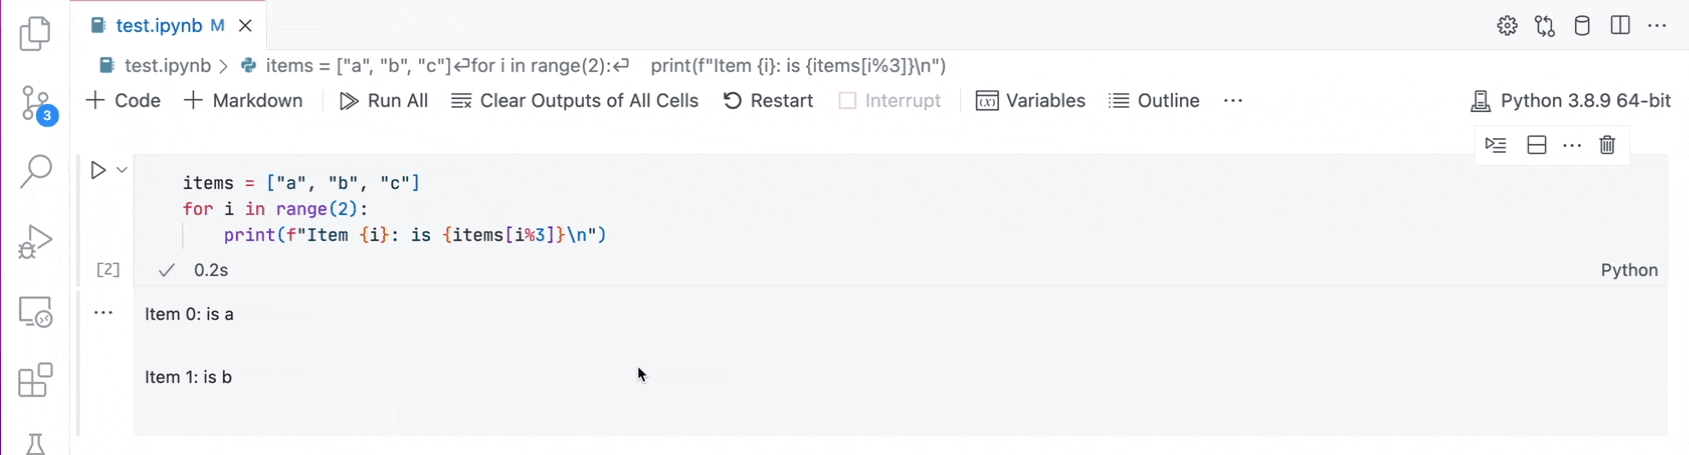 Search keyword 'item' in code cell then also in cell output